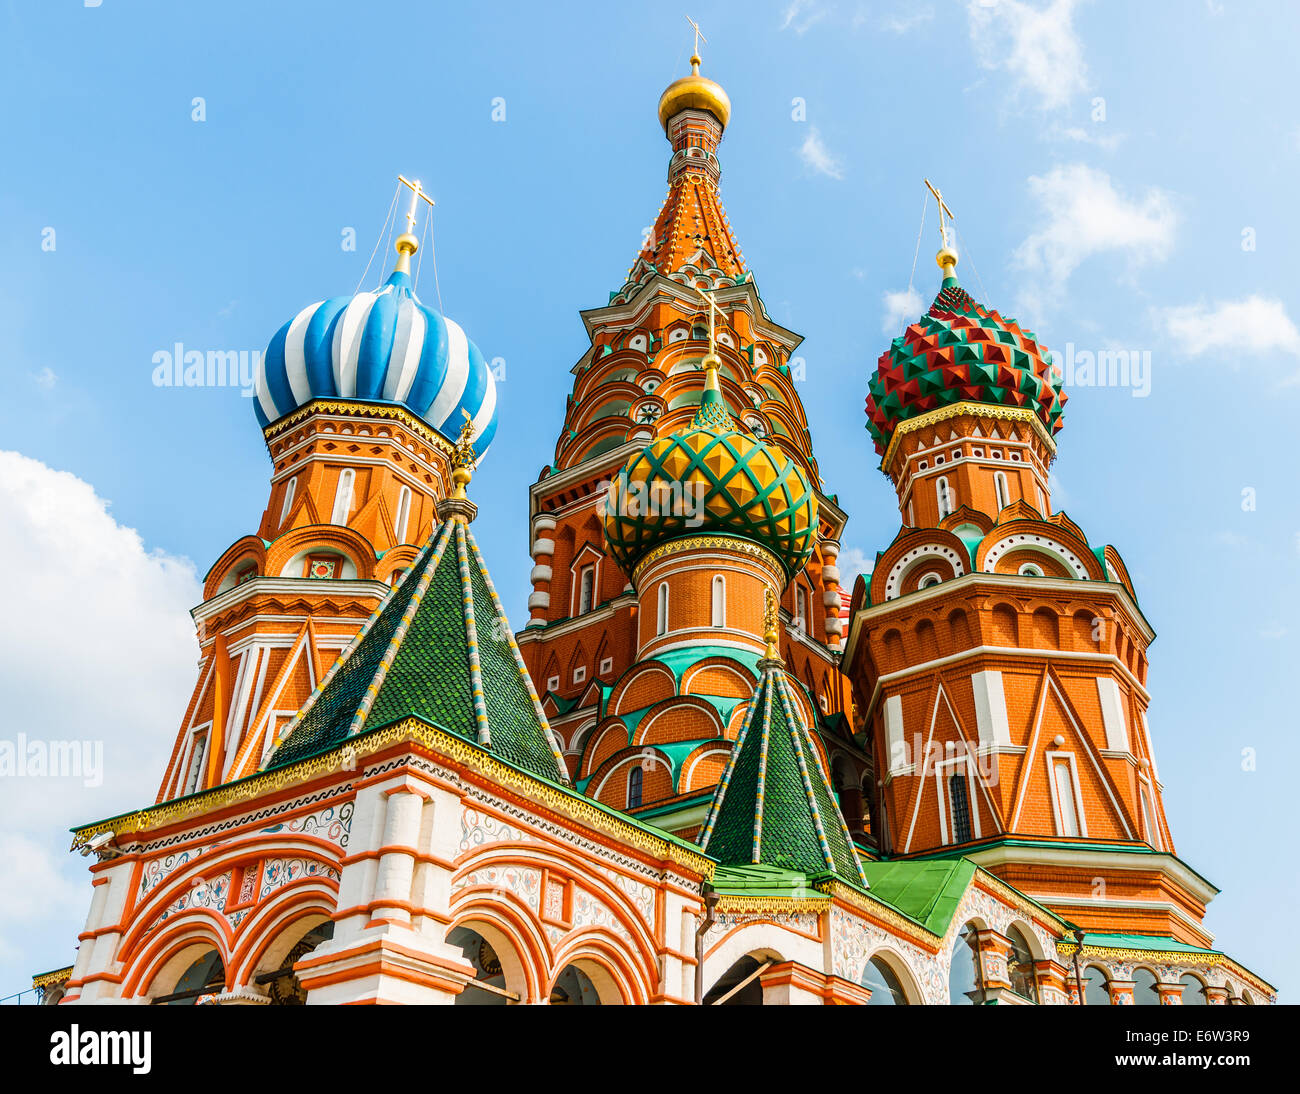 Domes of St. Basil's cathedral on Red Square of Moscow Stock Photo